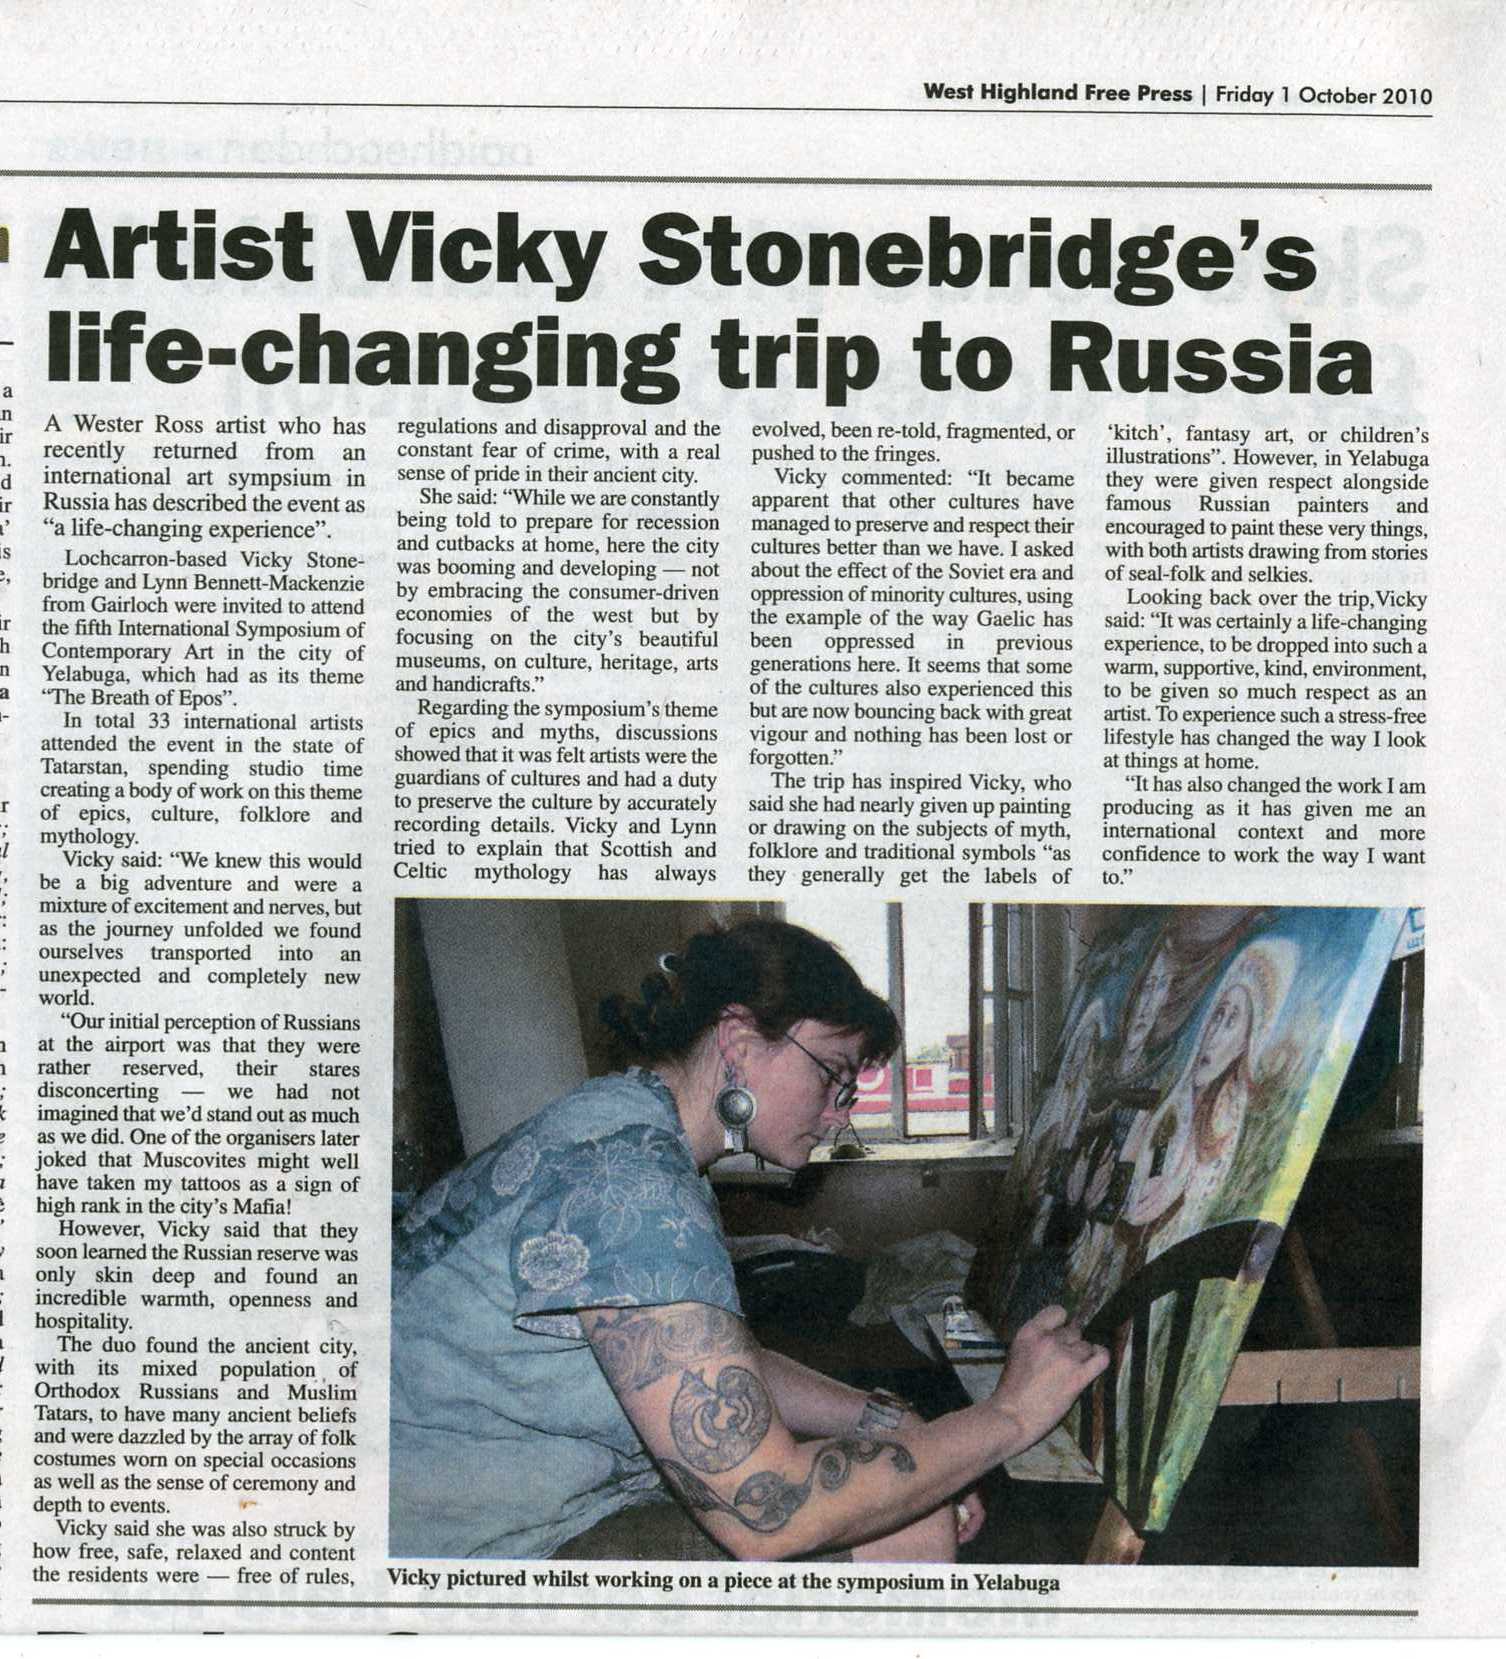 west highland free press russian trip coverage